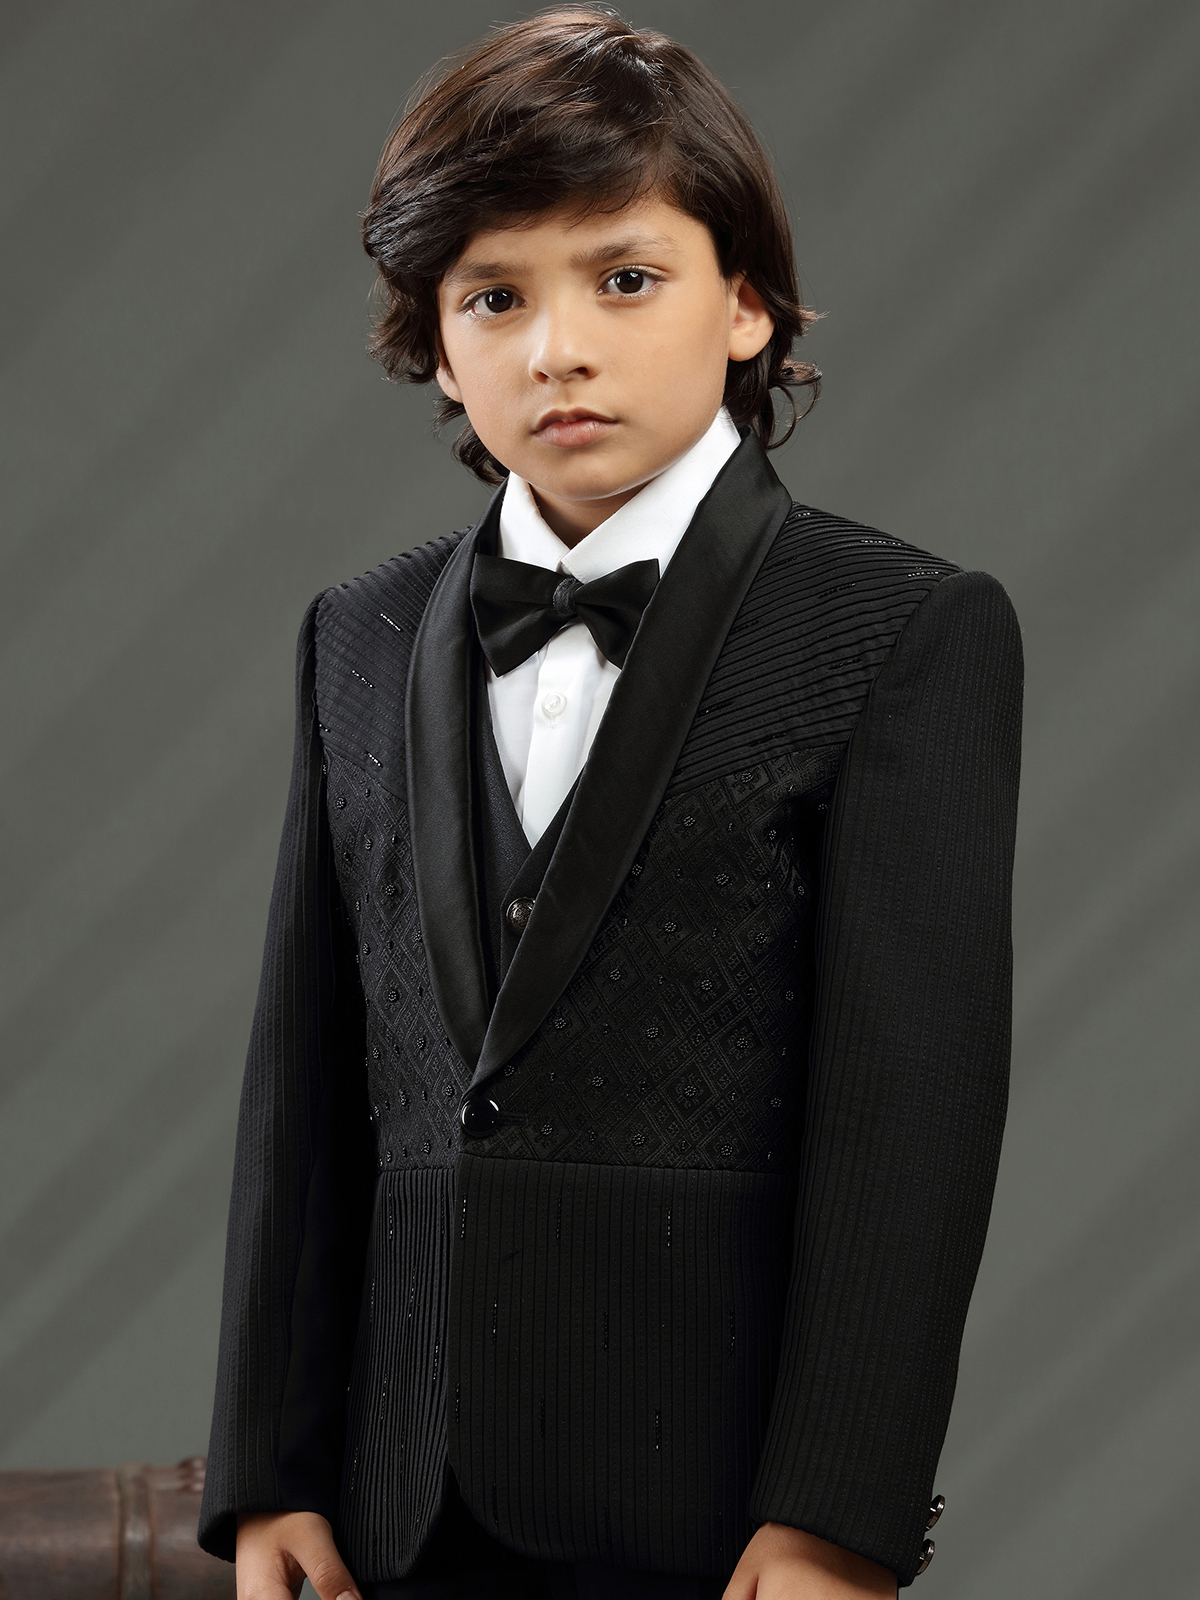 On Sale for Ltd Time White Boys Formal Suit Complete With Tie, Vest ,  Pants, Coat, Shirt for Wedding, Graduation and First Communion - Etsy